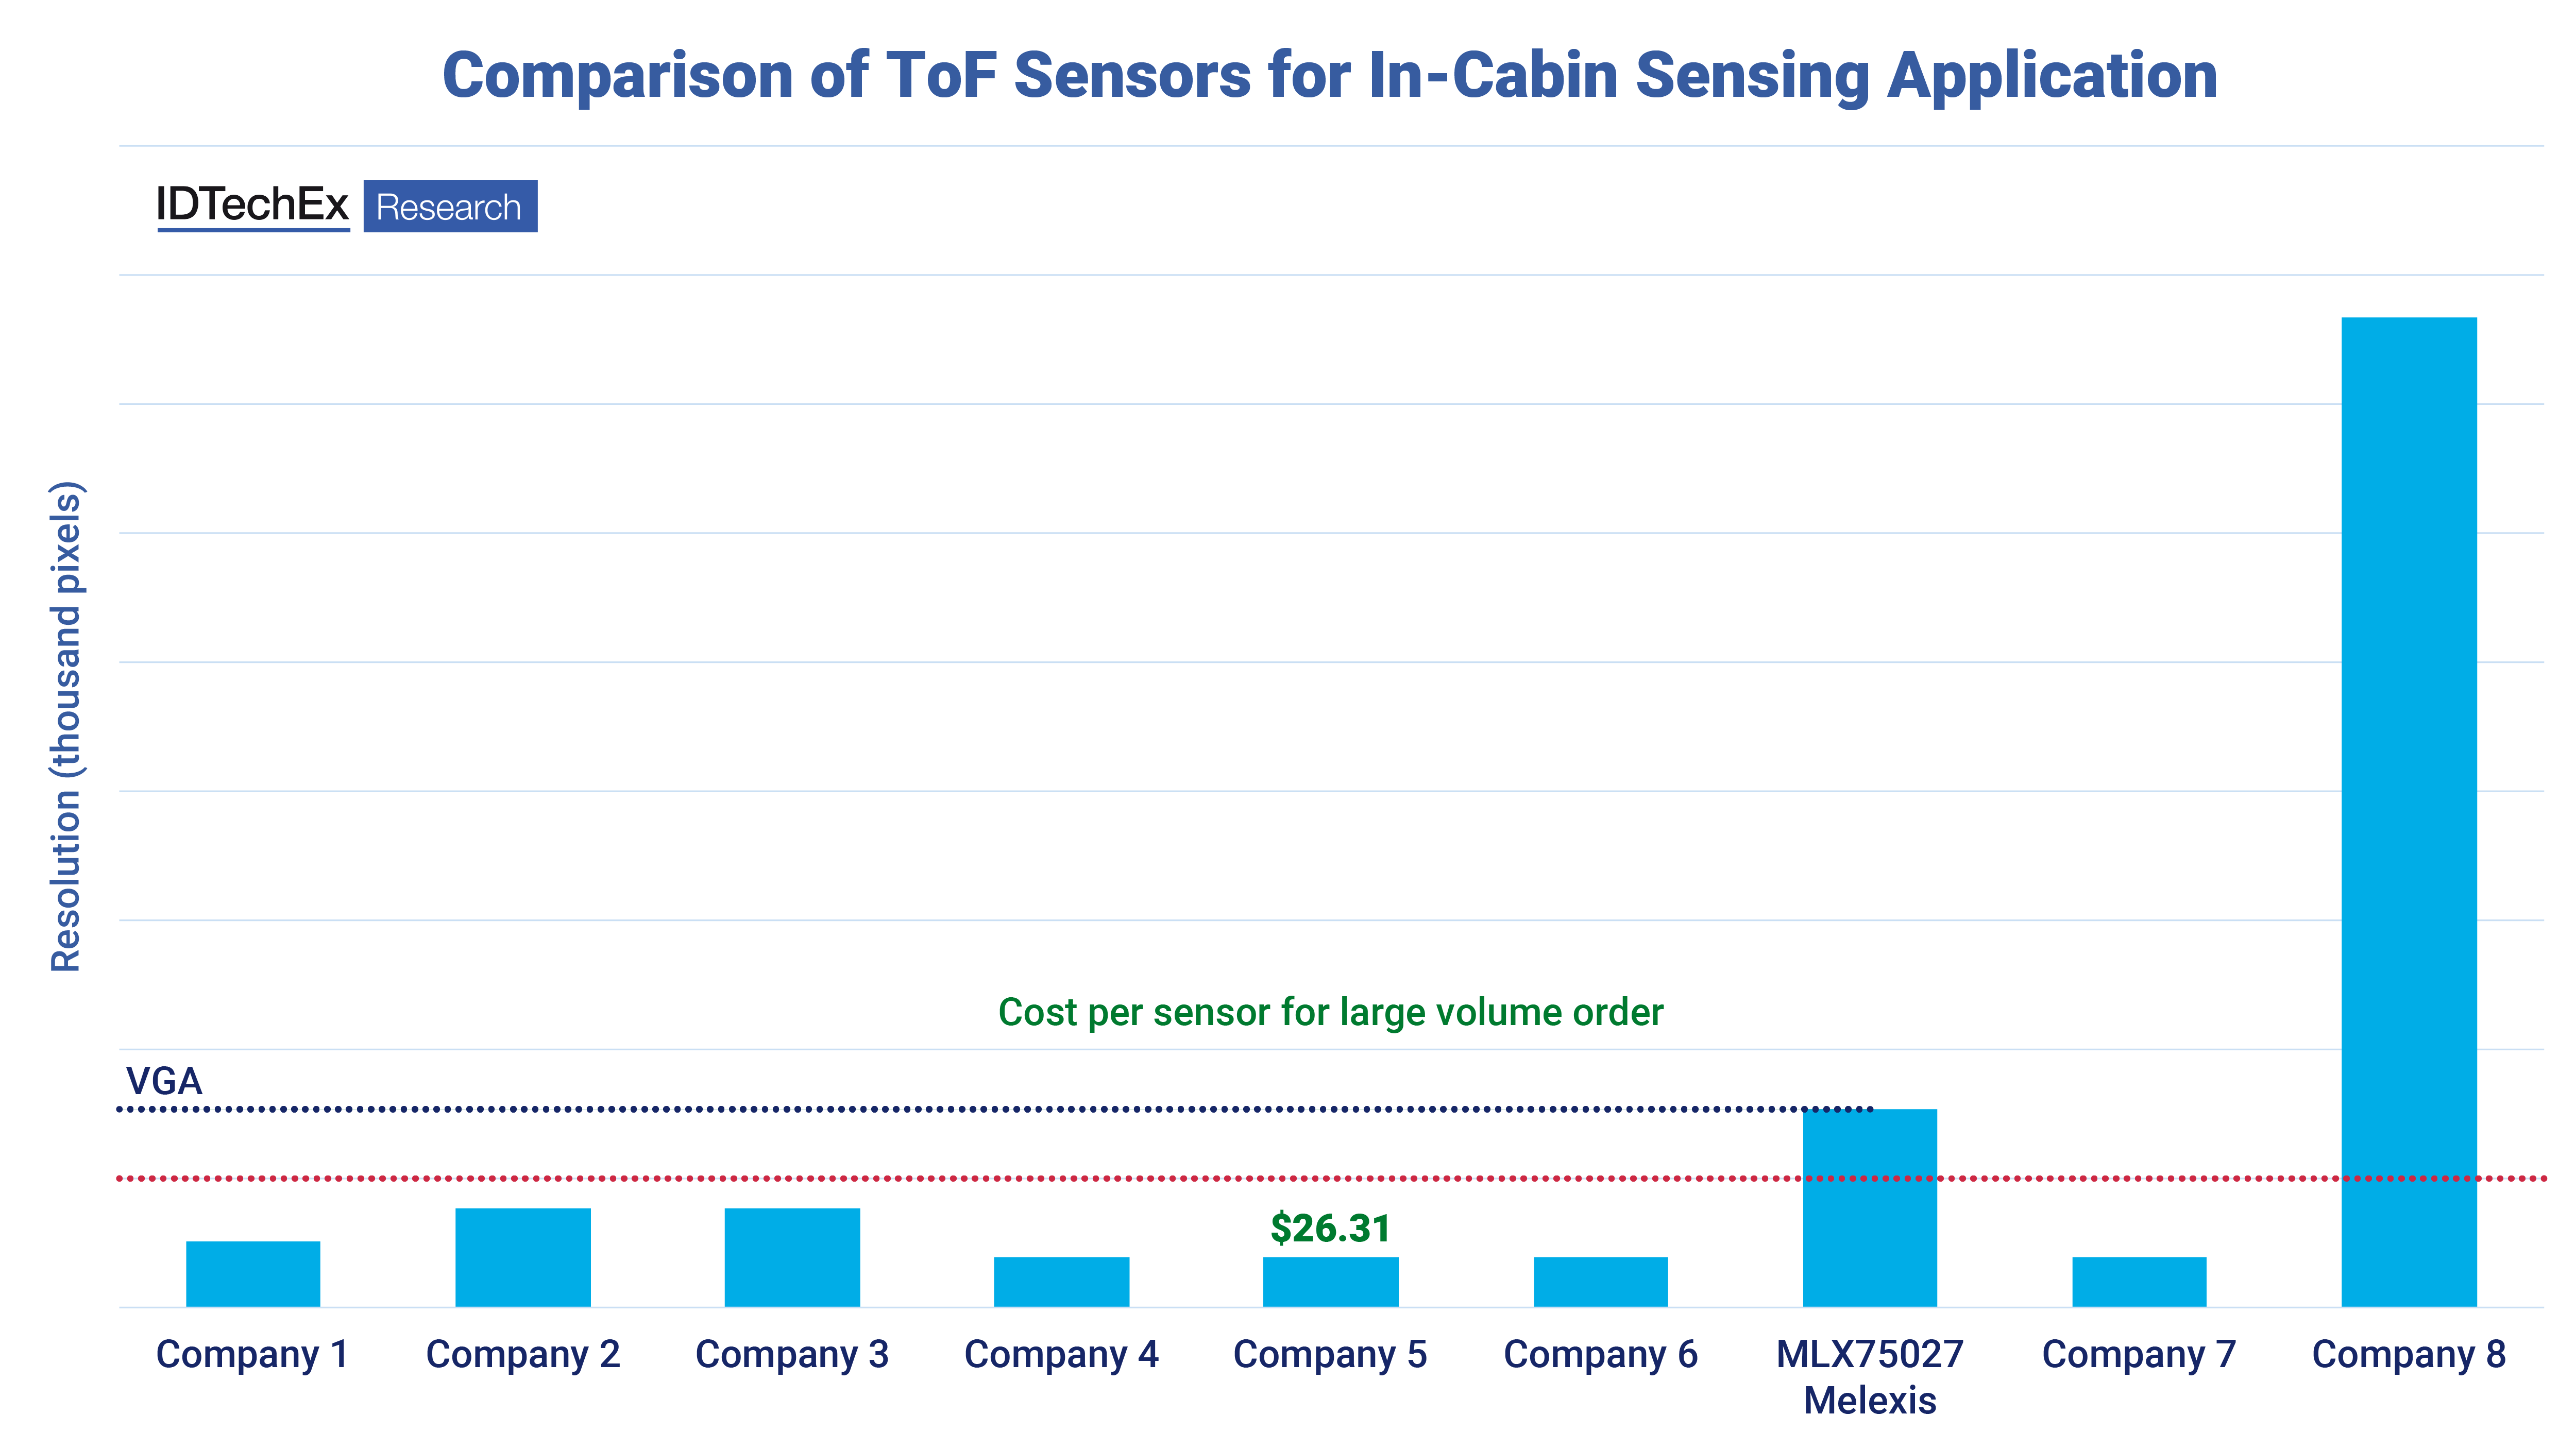 Comparison of Time-of-Flight (ToF) imagers for in-cabin sensing reveals a cost of approximately US$30±10 per unit for large volumes (1000 units). Source IDTechEx.png